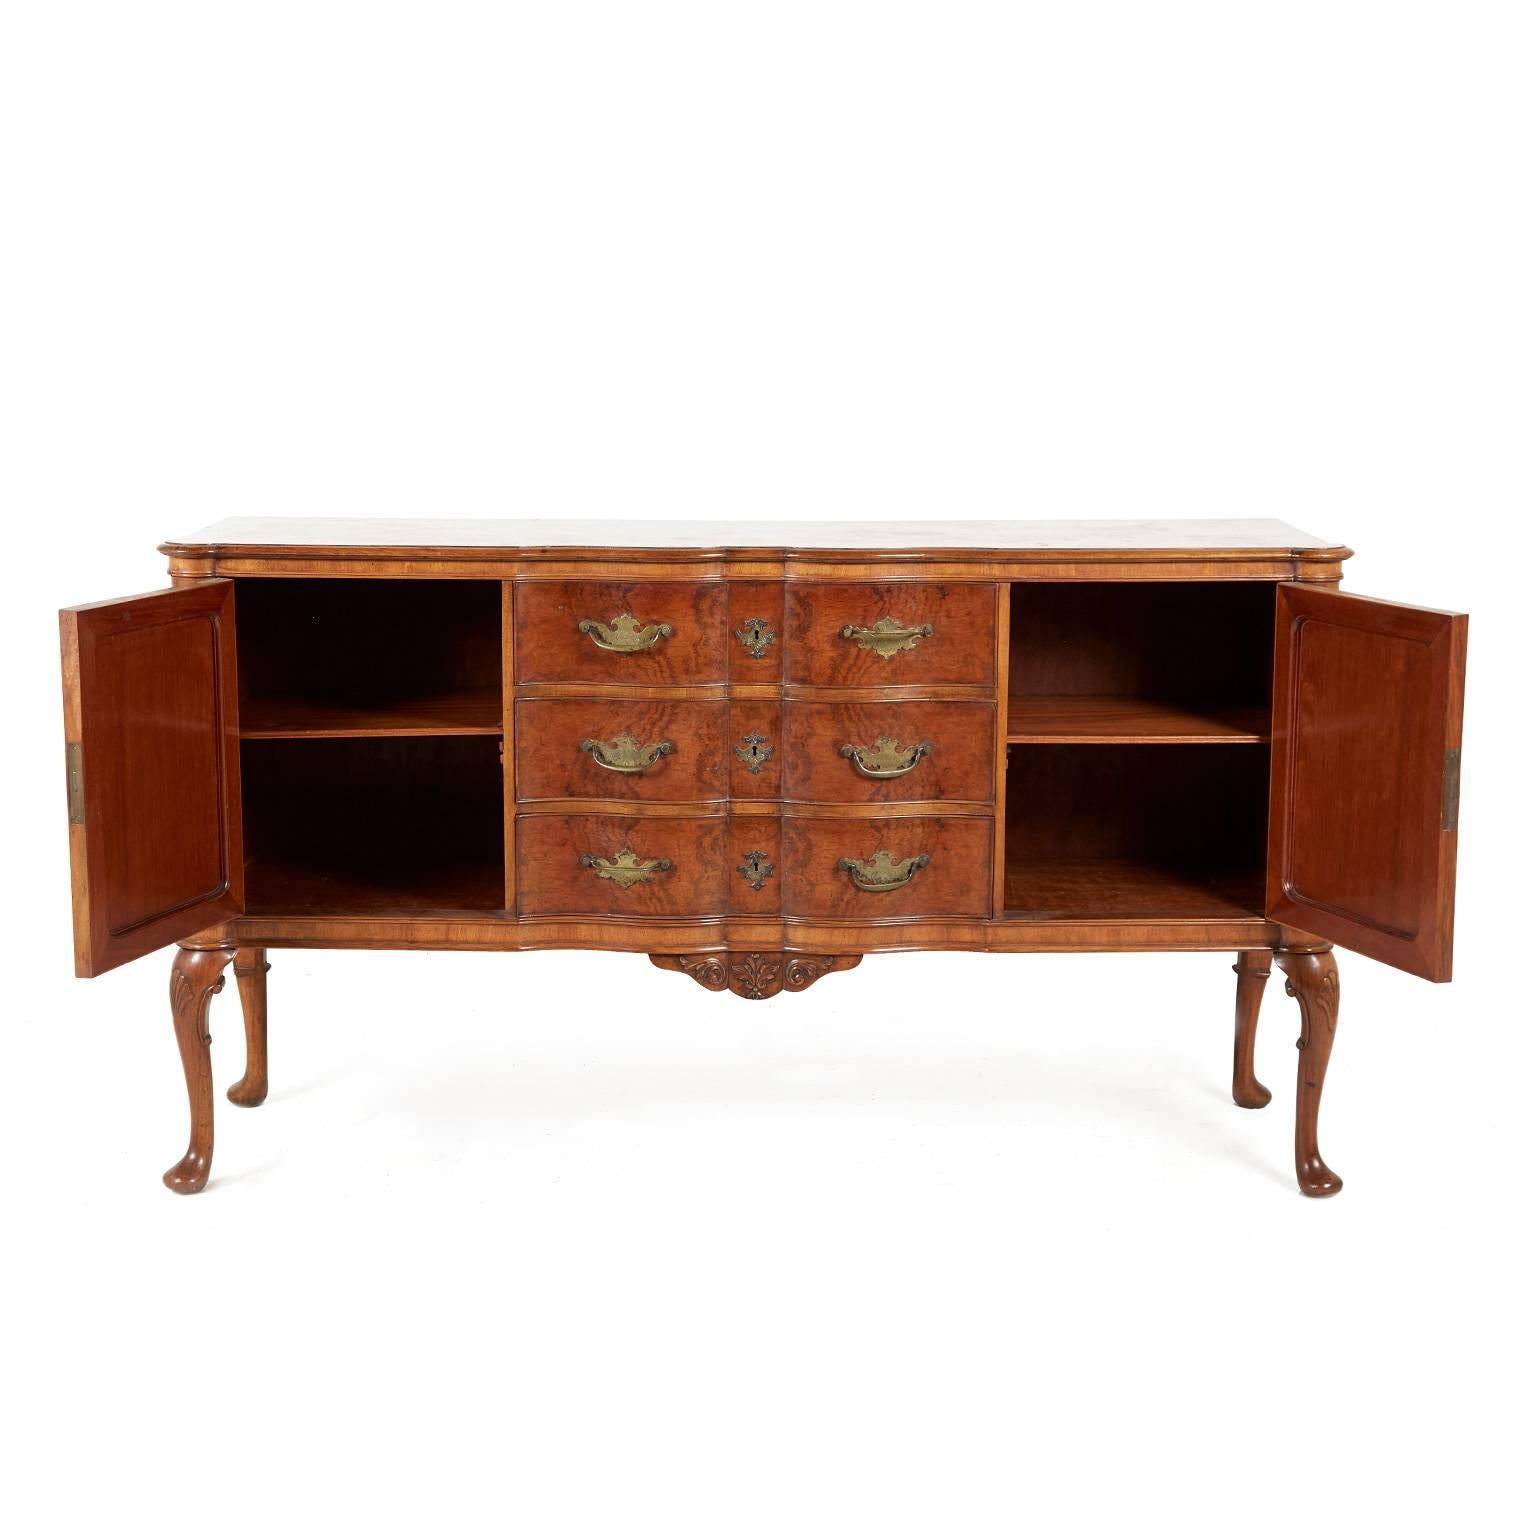 Antique Queen Anne buffet of a smaller scale, with lovely burl walnut figured inlays. Versatile size making it suitable for a number of rooms throughout the home, Midcentury, circa 1950.



          